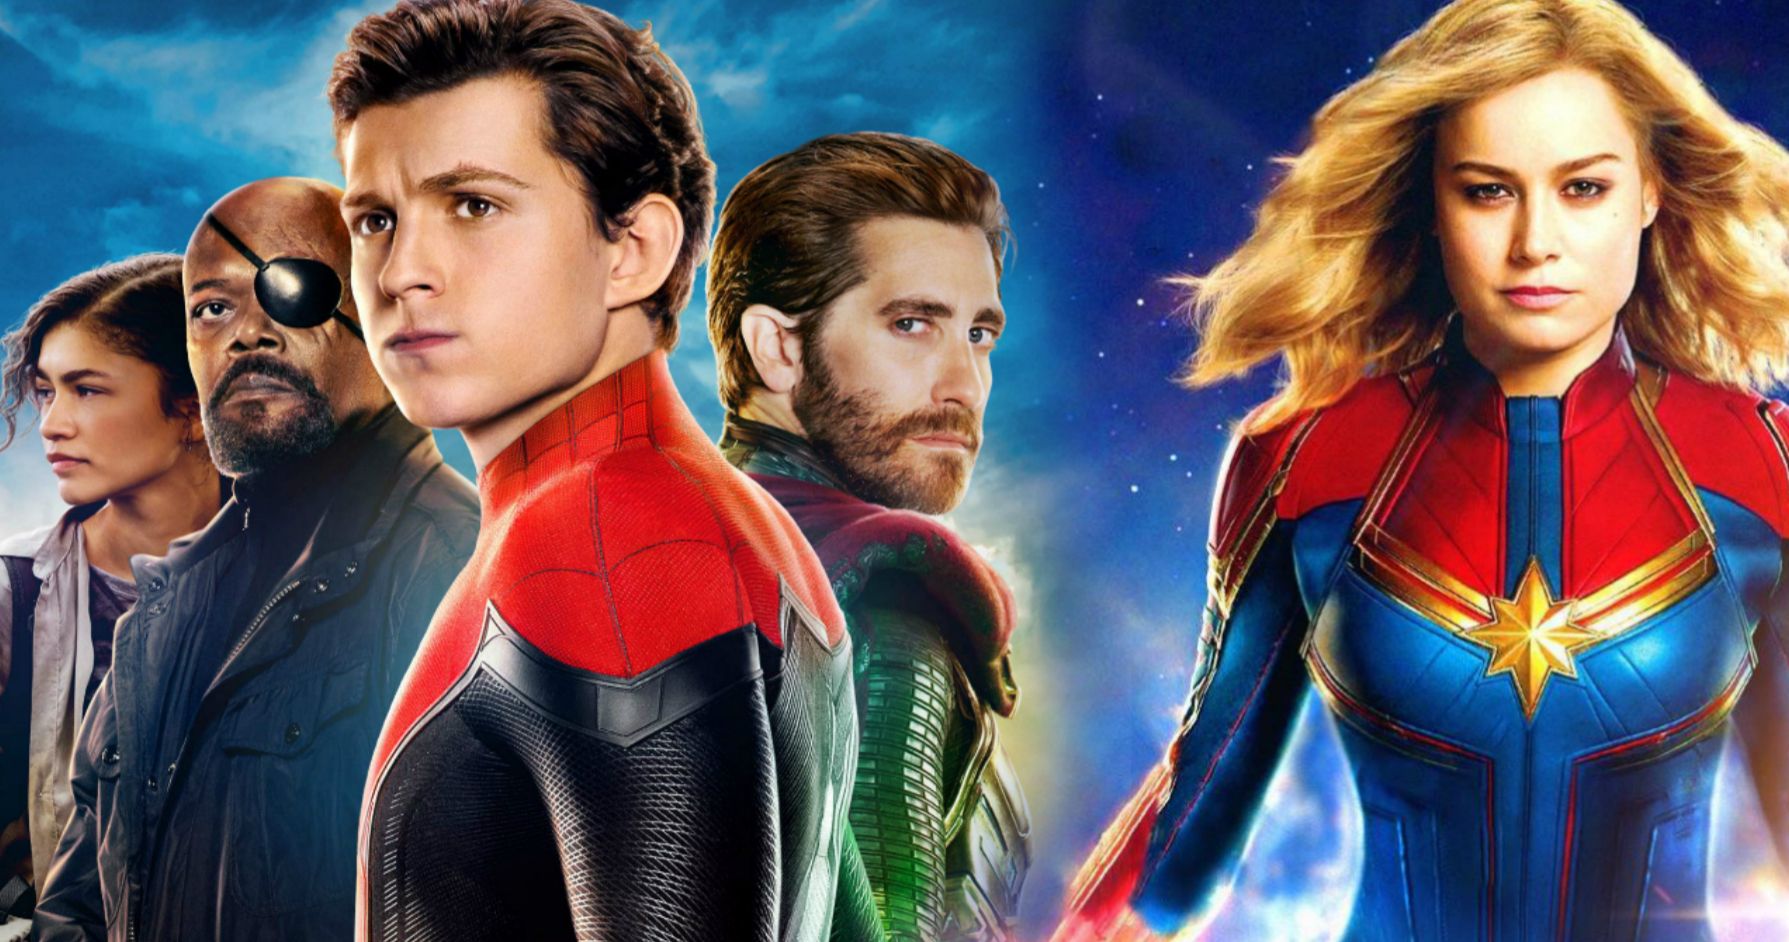 Spider-Man: Far from Home Beats Captain Marvel as 3rd Biggest Movie of 2019